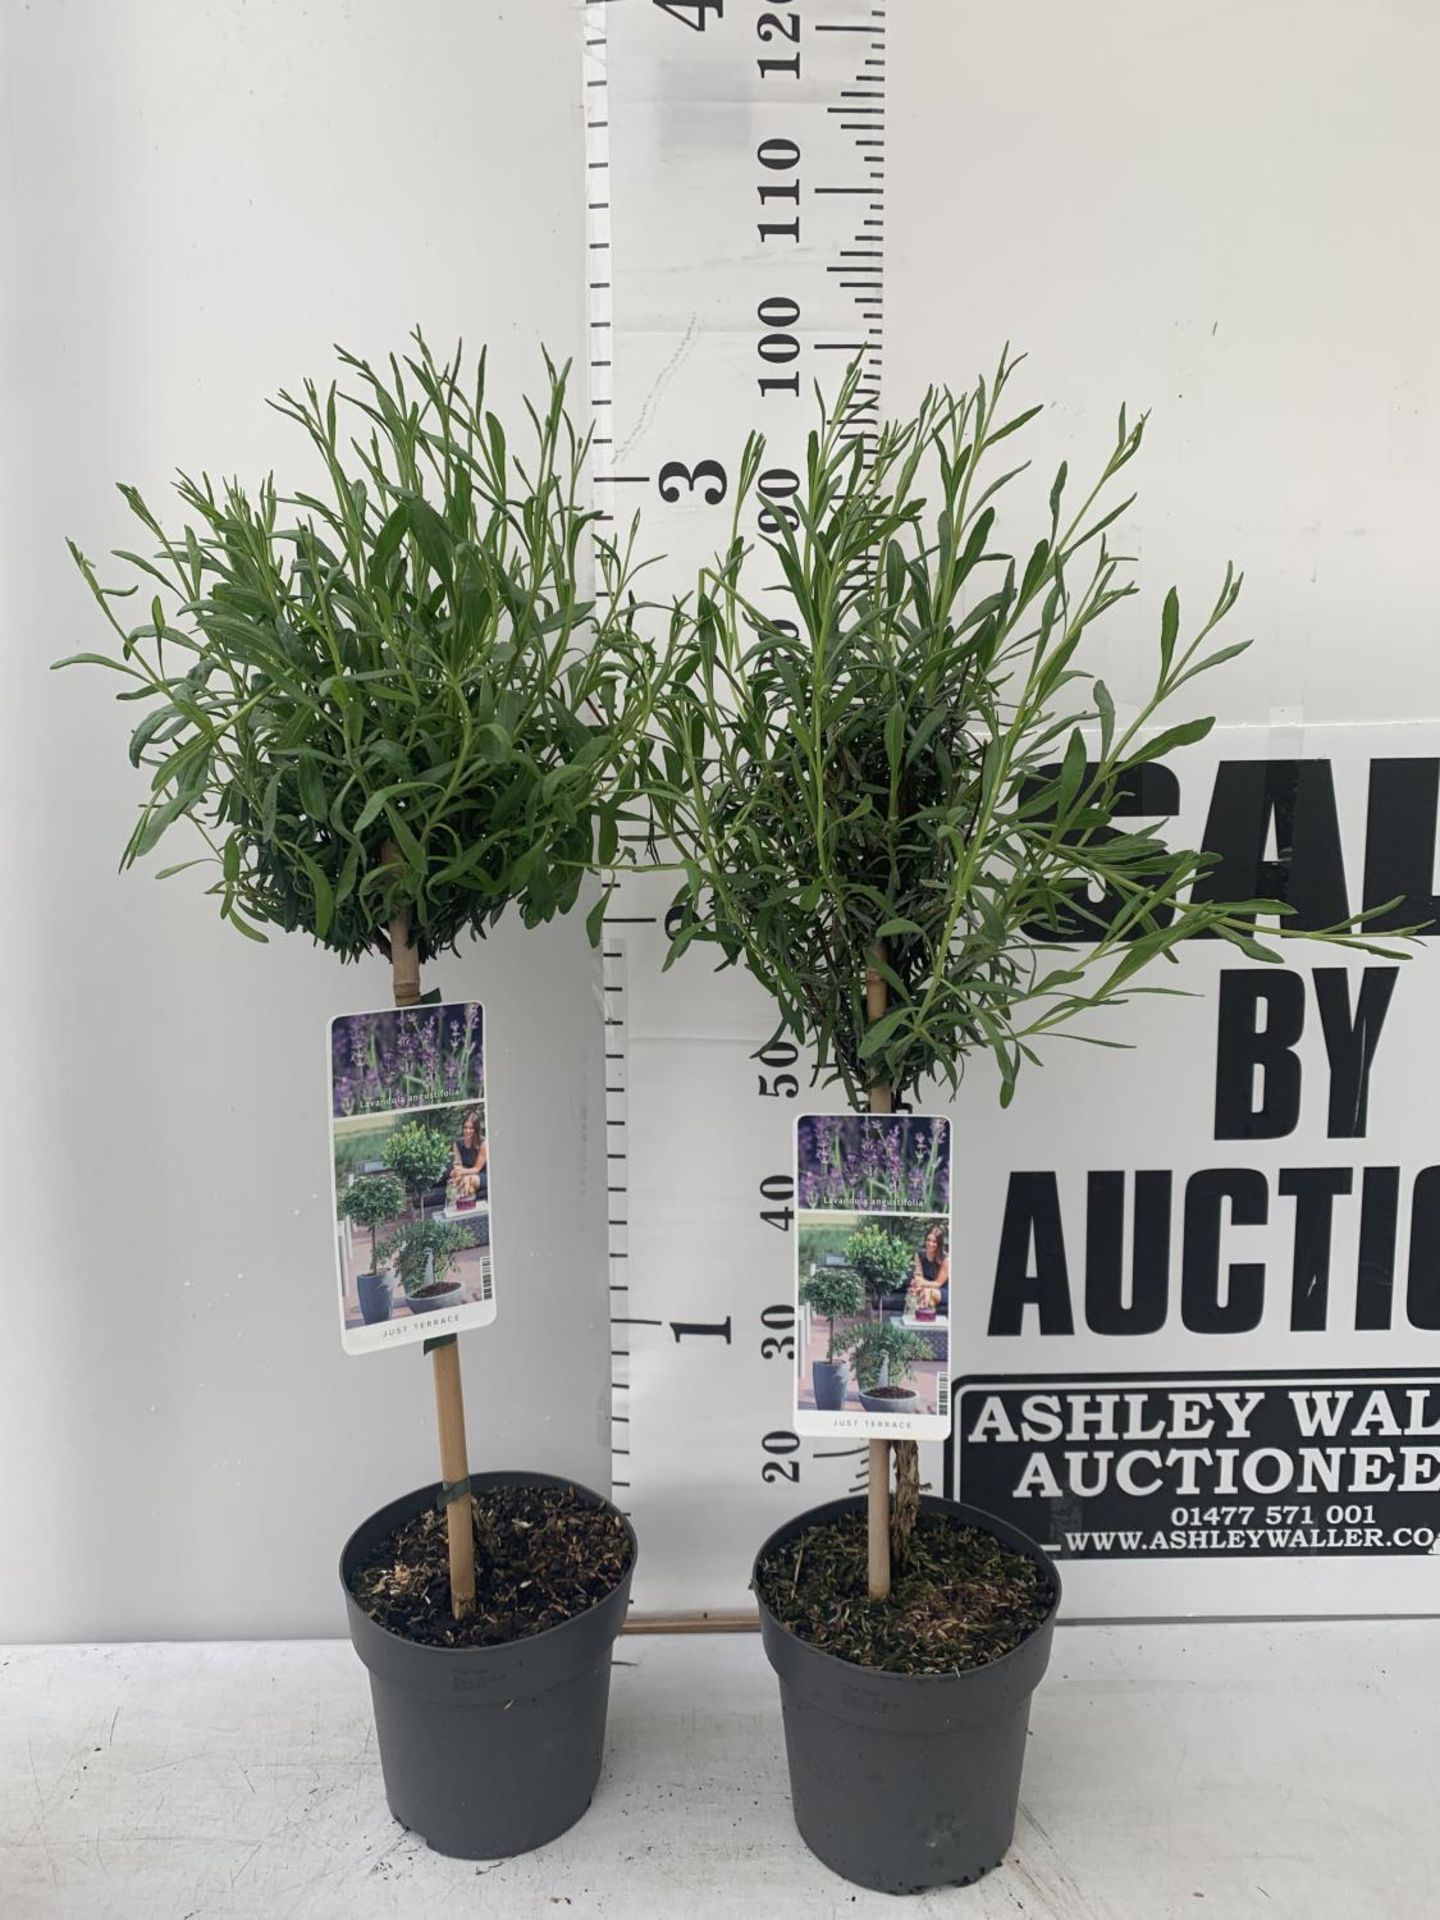 TWO LAVENDER 'AUGUSTFOLIA' STANDARD TREES APPROX A METRE IN HEIGHT IN 3LTR POTS PLUS VAT TO BE